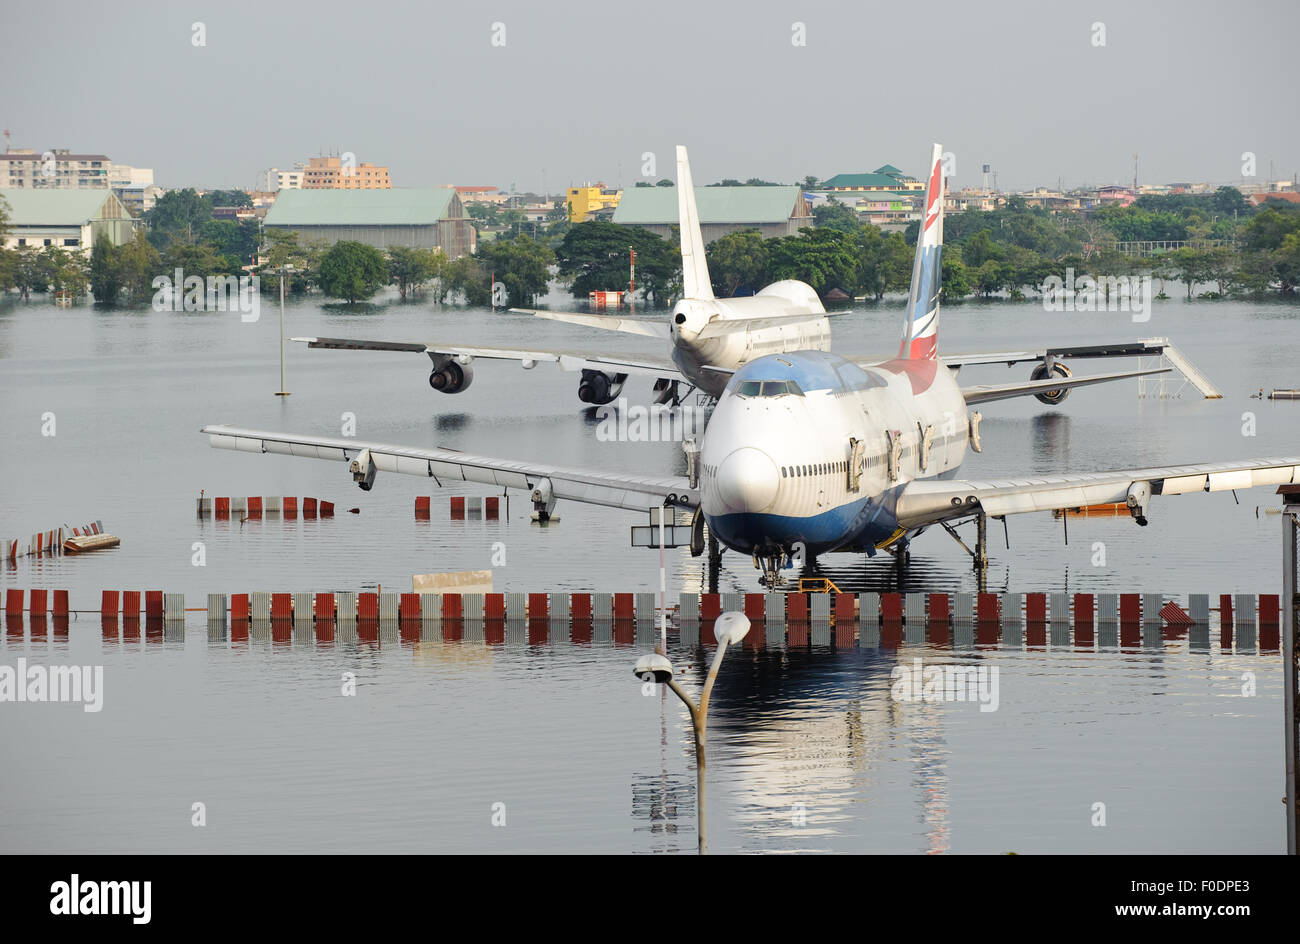 Airport fill with water during flood crisis Stock Photo